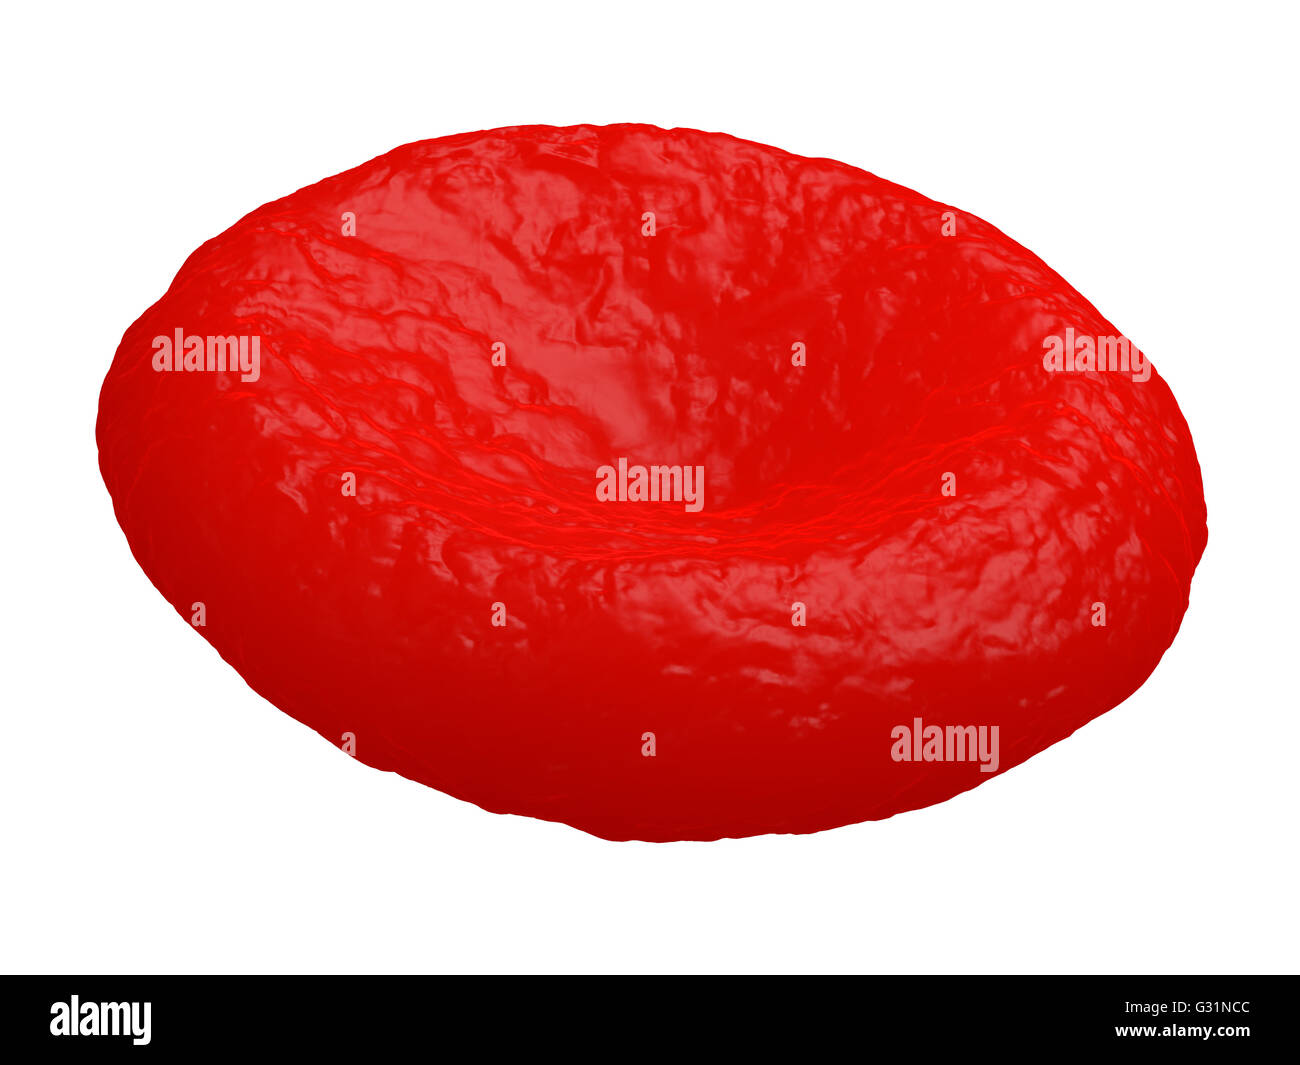 Red blood cell erythrocyte. Isolated on white background. Include path. Human anatomy model 3D visualization. Stock Photo